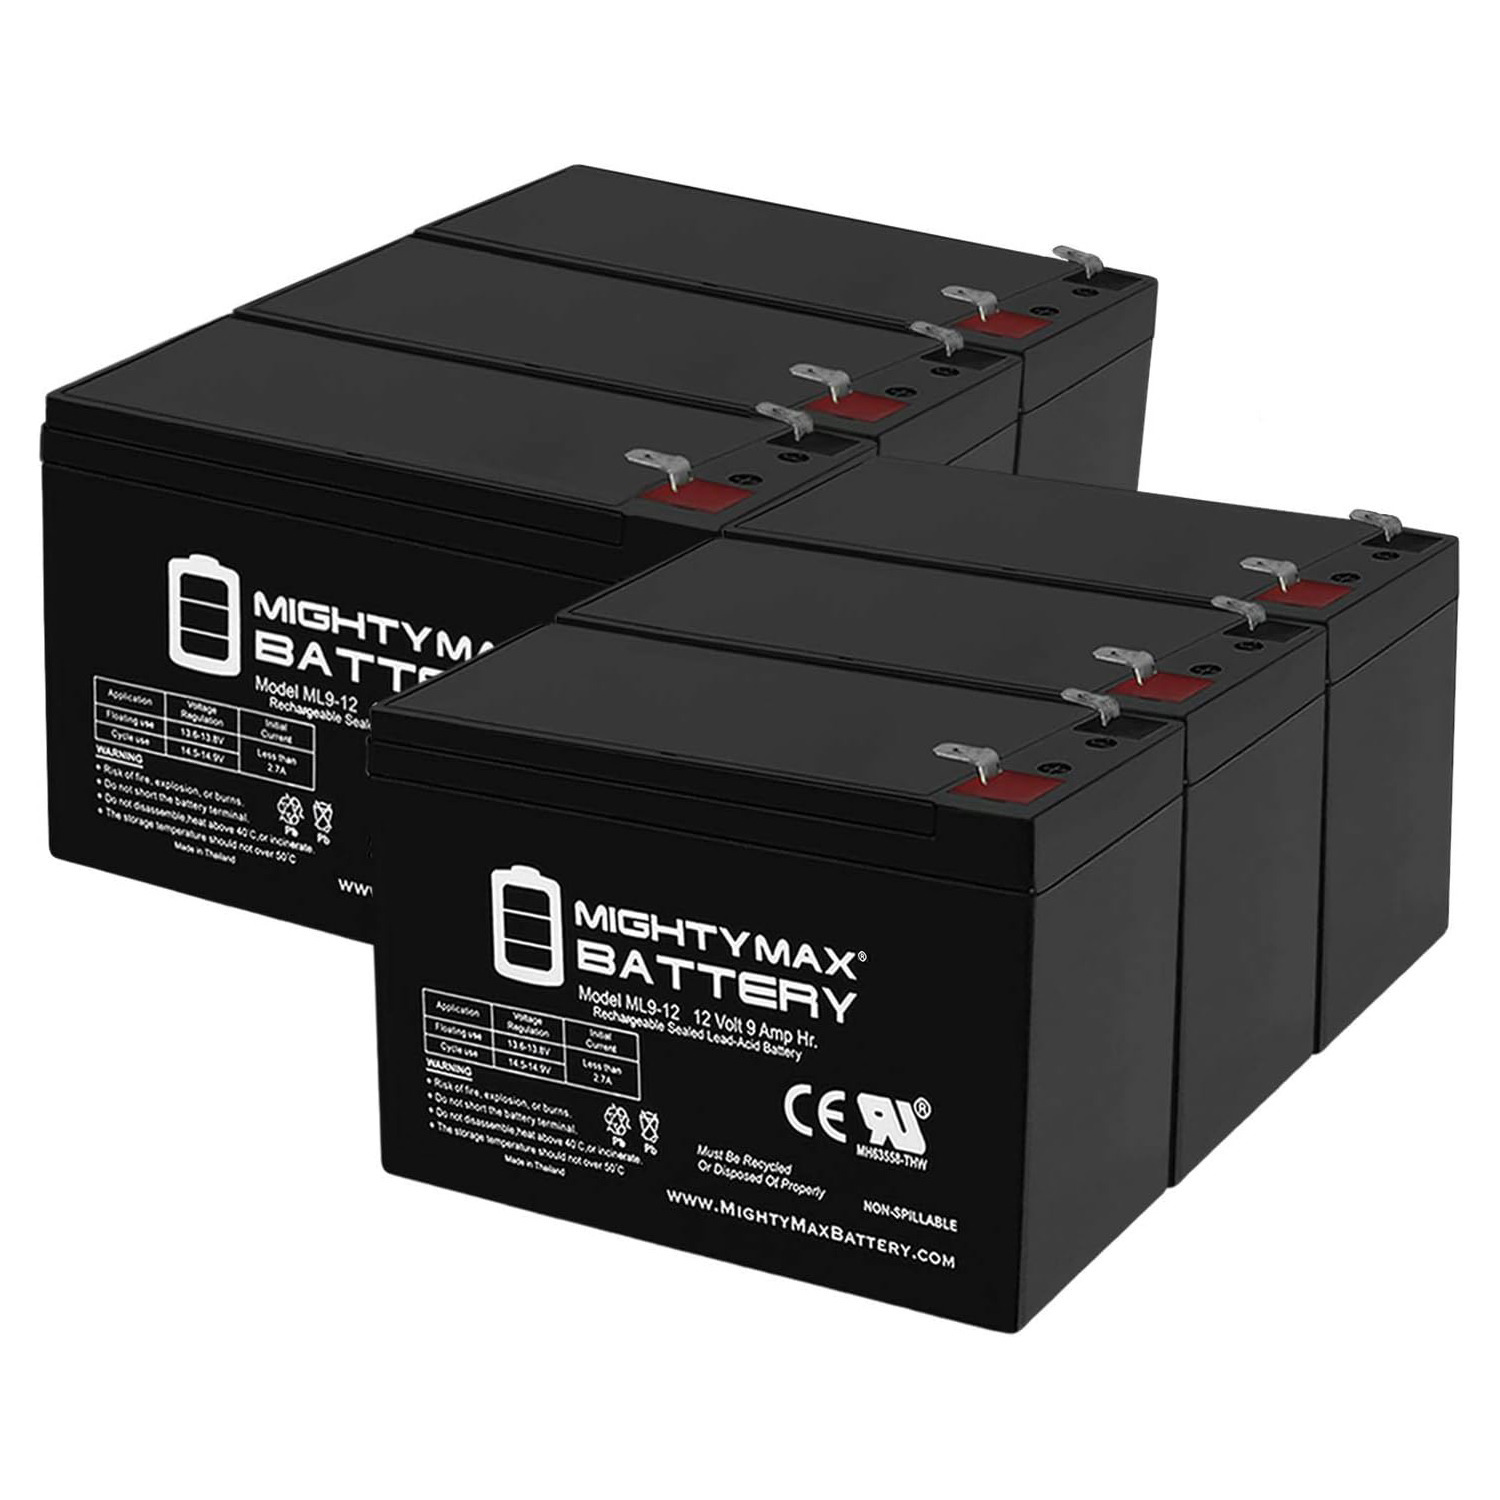 Altronix SMP3PMCTX 12V, 9Ah Lead Acid Battery - 6 Pack